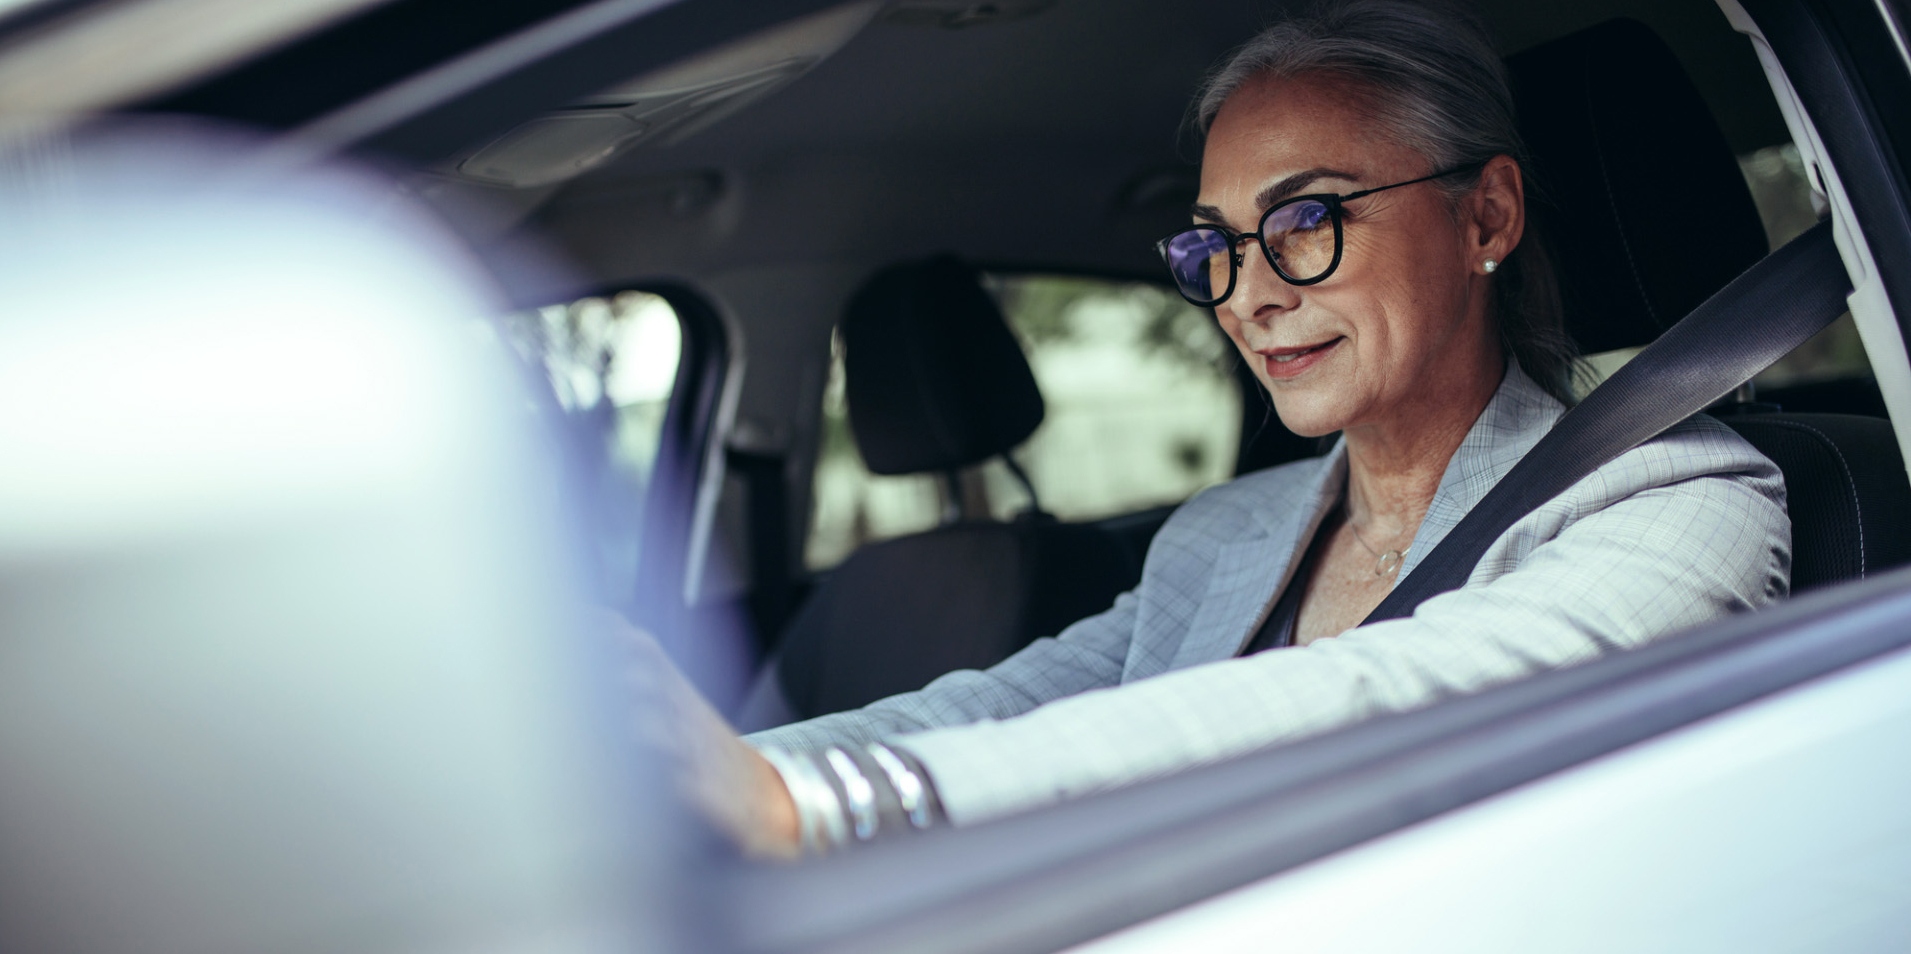 A mature women in a car is wearing glasses with ZEISS DriveSafe lenses.